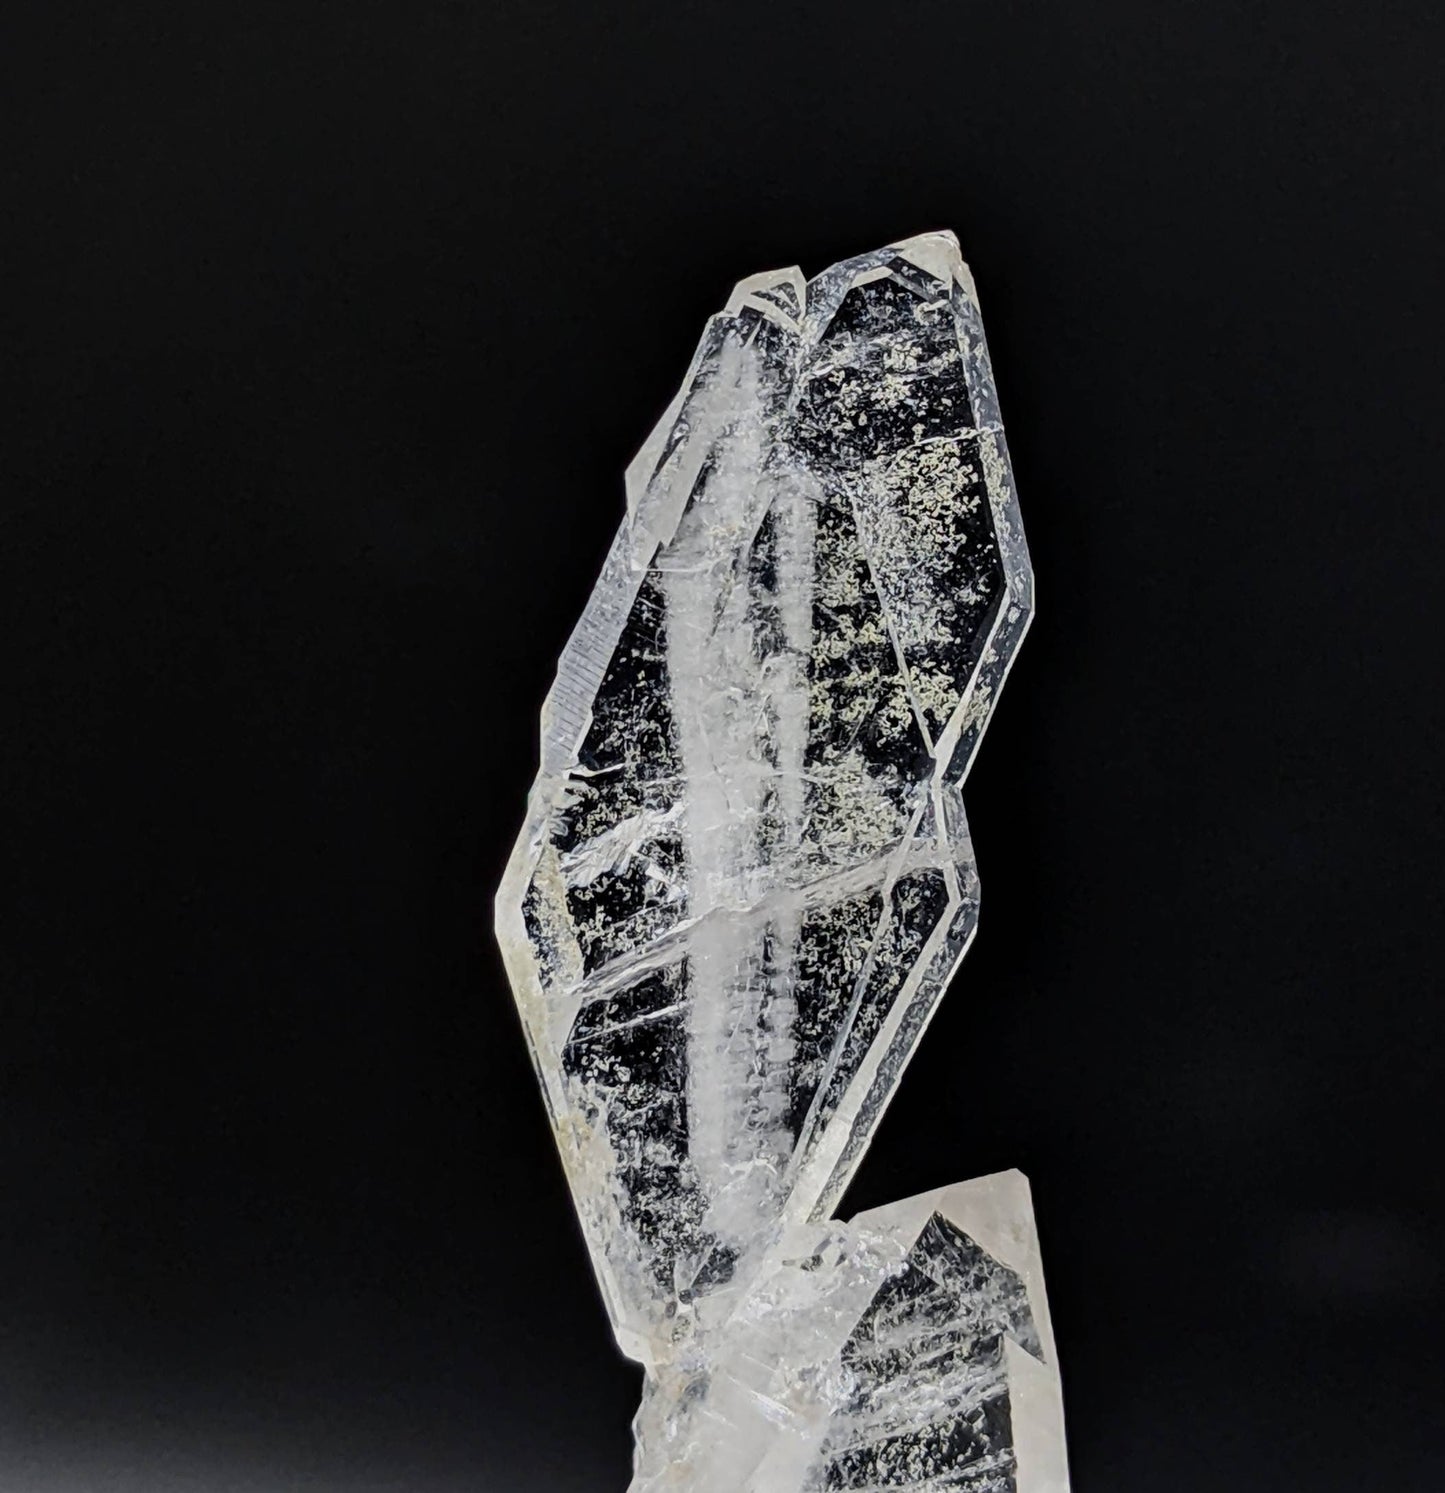 ARSAA GEMS AND MINERALSAesthetic crystal of Faden quartz with another quartz grown on top from Baluchistan Pakistan, 10 grams - Premium  from ARSAA GEMS AND MINERALS - Just $45.00! Shop now at ARSAA GEMS AND MINERALS